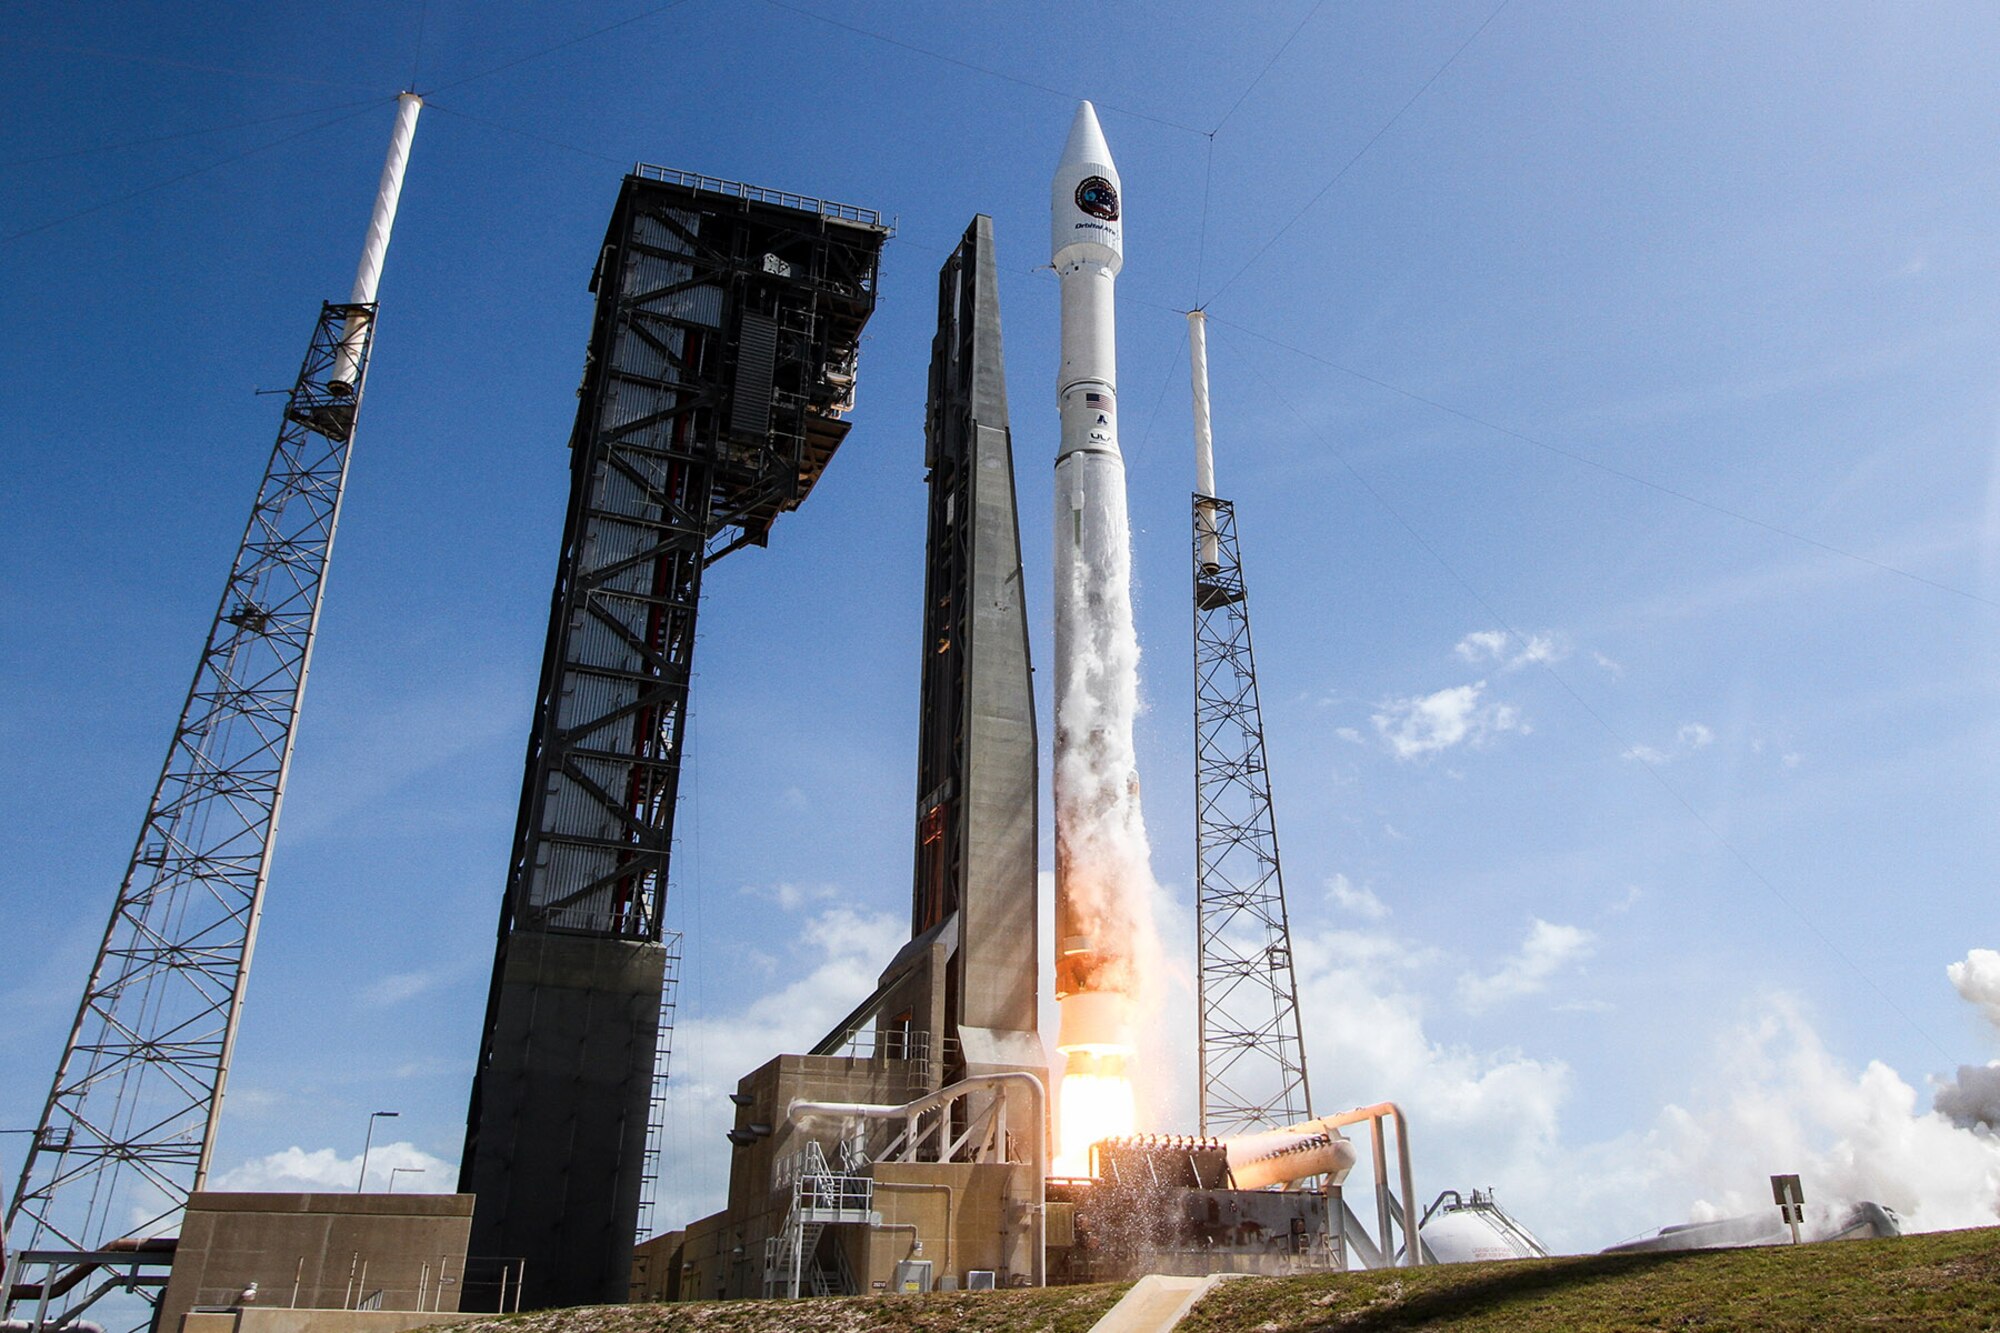 The U.S. Air Force’s 45th Space Wing supported NASA’s successful launch of Orbital ATK’s Cygnus spacecraft aboard a United Launch Alliance Atlas V rocket from Space Launch Complex 41 here April 18 at 11:11 a.m. ET. (Courtesy photo/United Launch Alliance)